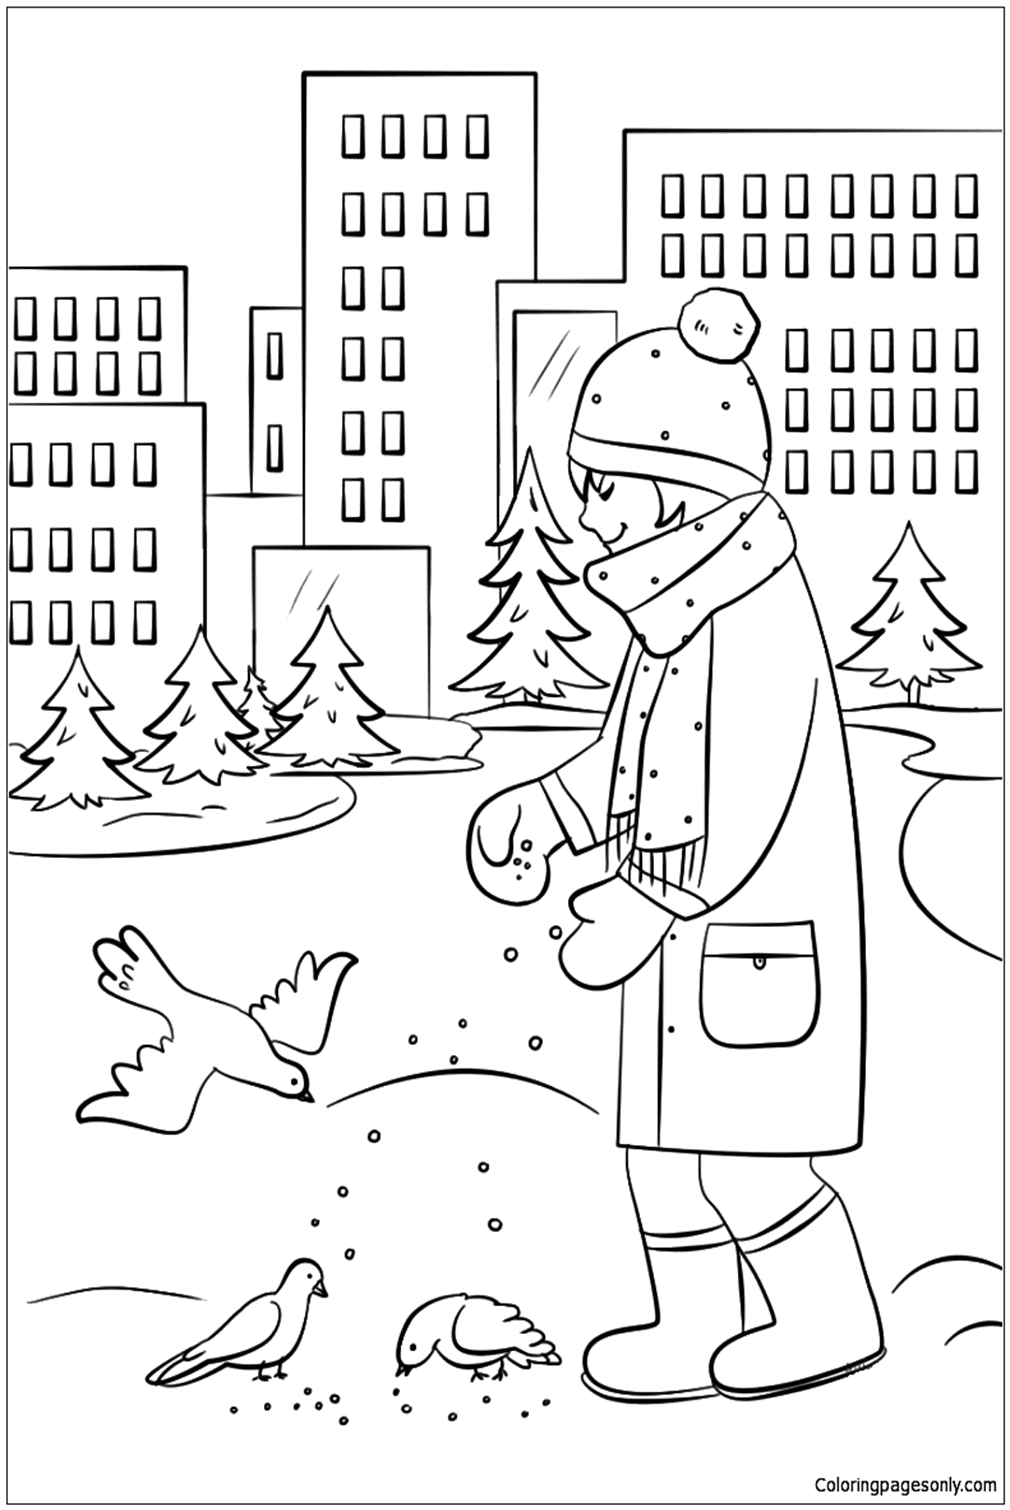 Feeding Birds in Winter Coloring Pages